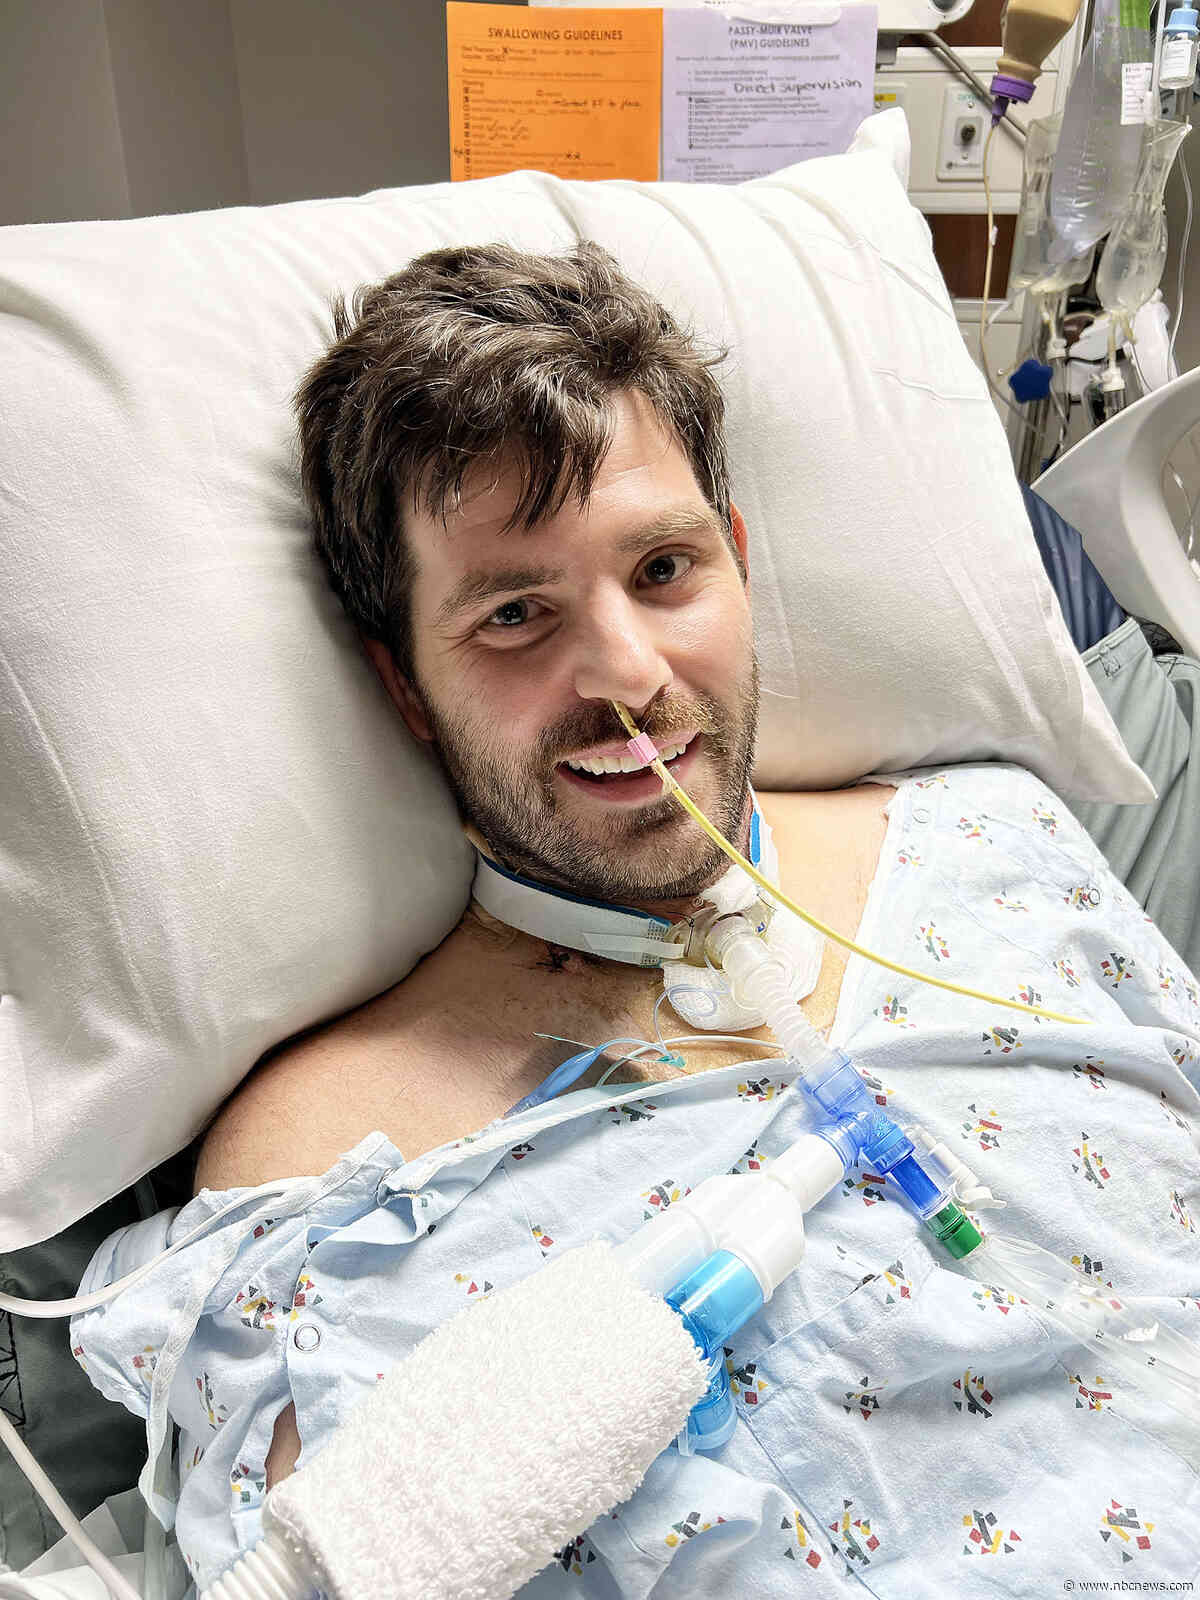 32-year-old man becomes fully paralyzed within days of catching Covid due to rare syndrome